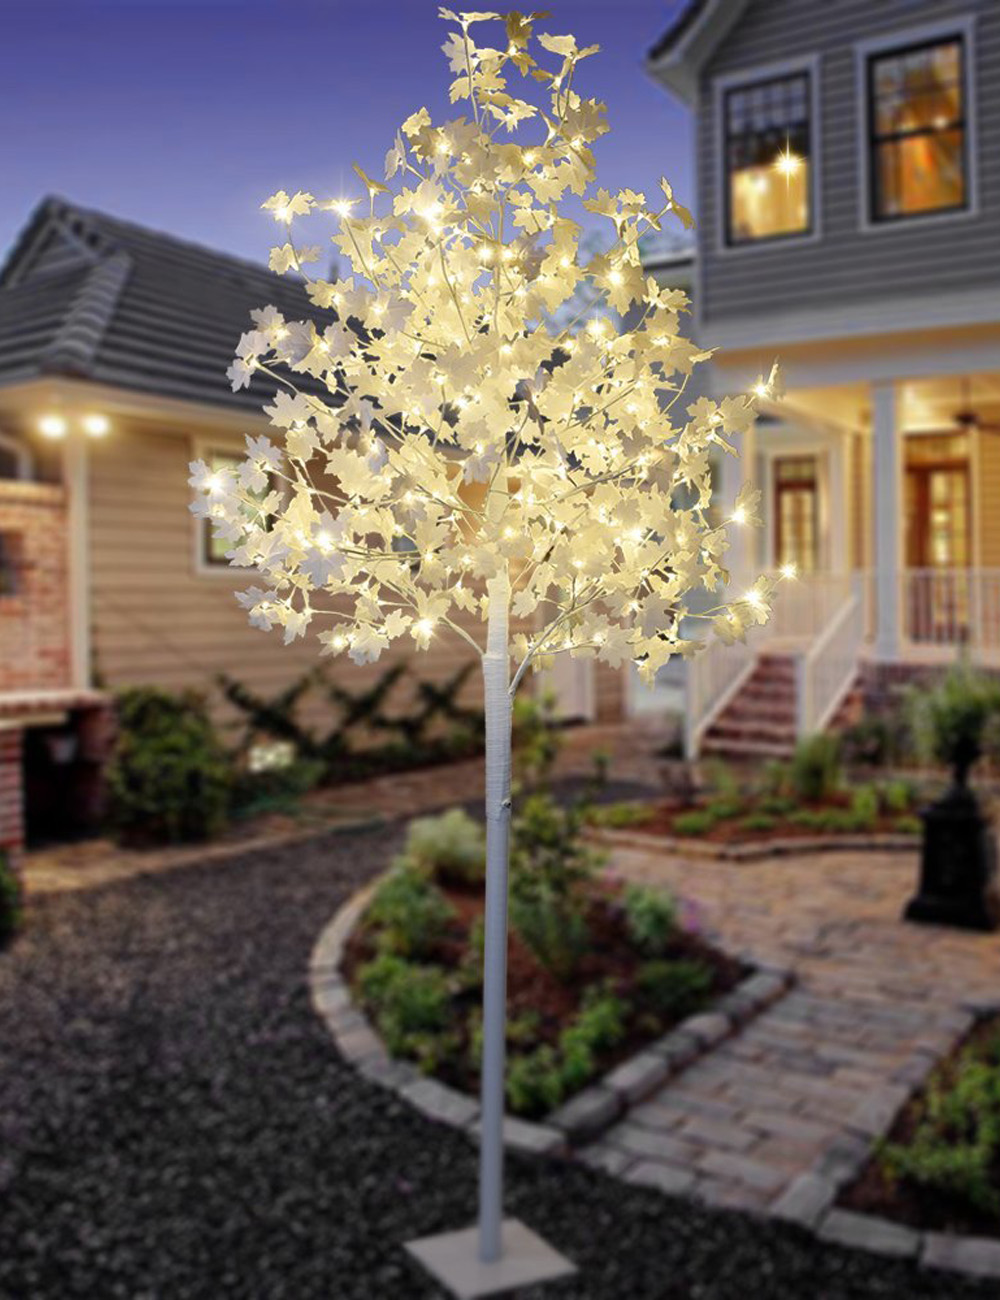 Lightshare White Maple Tree - 8 ft. with 264 LED Lights, Multi-Color Lights, Remote Control